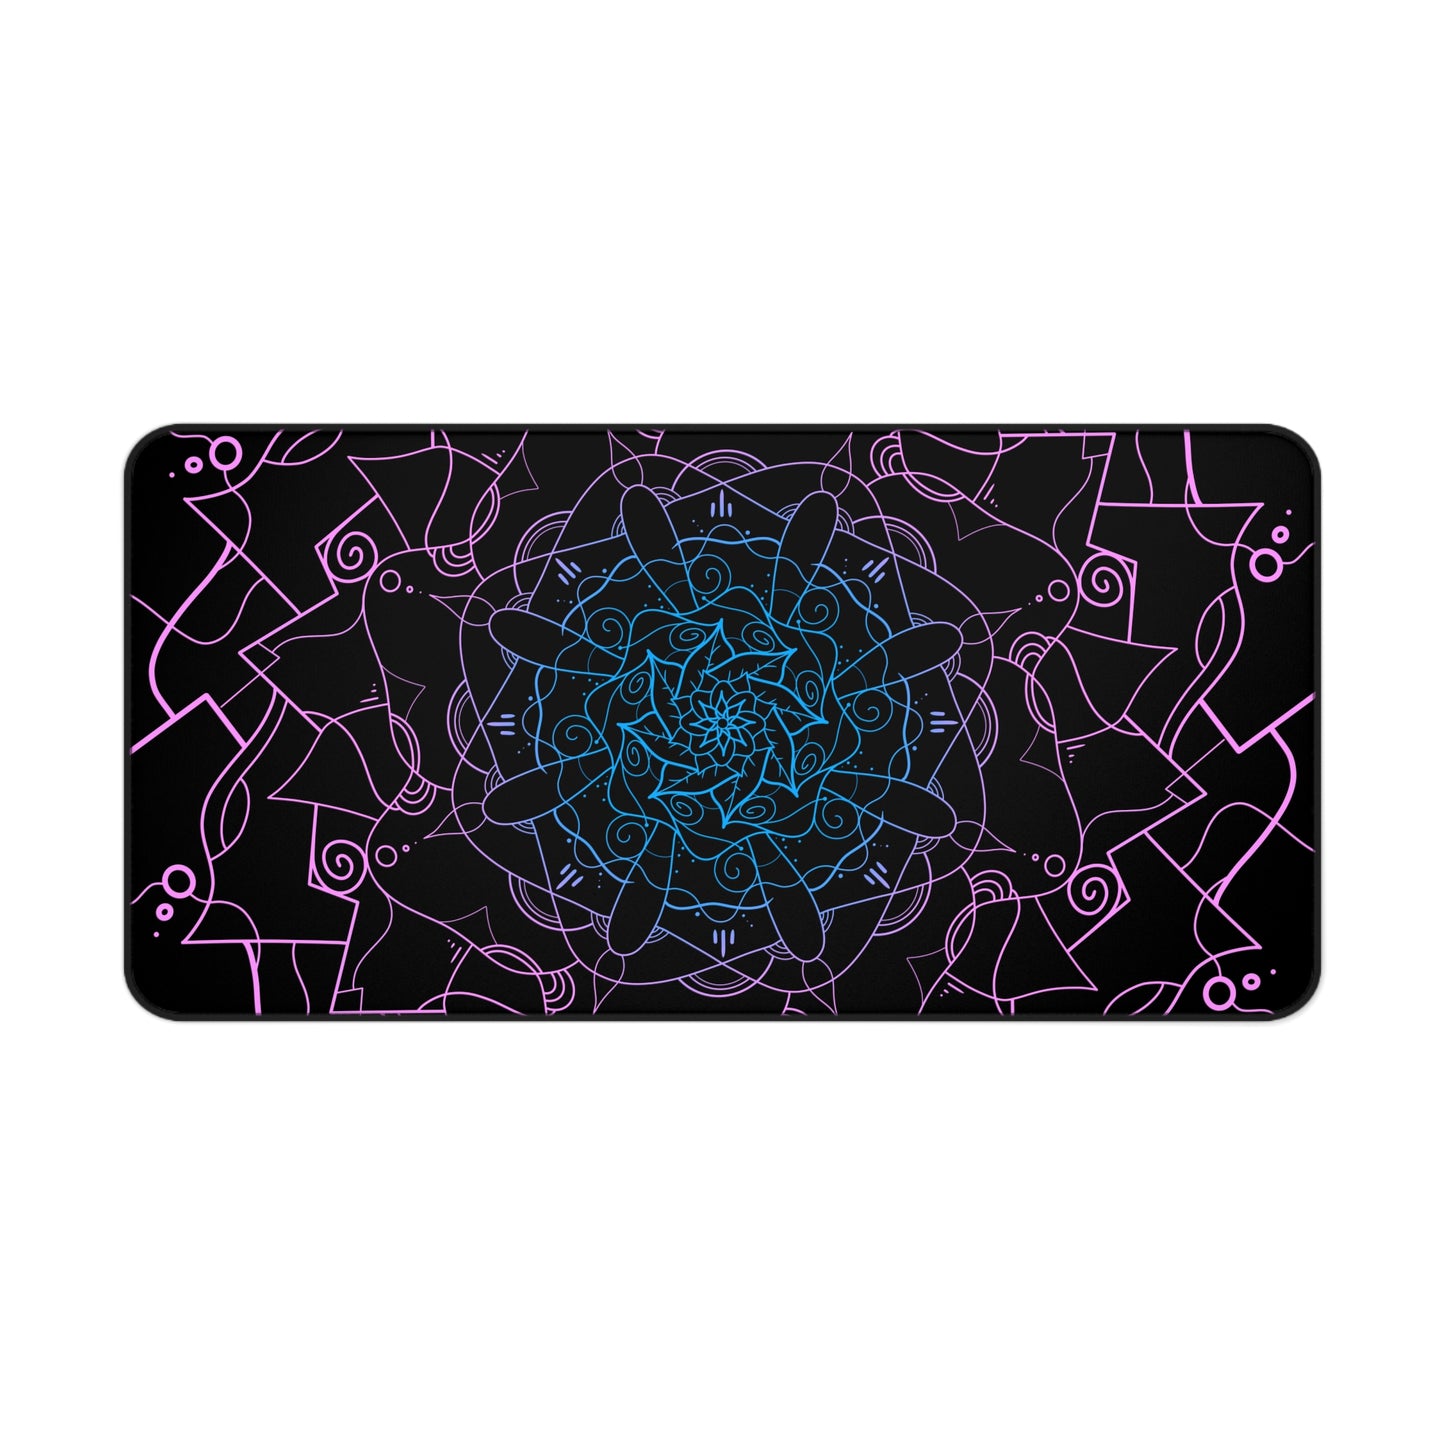 A 31" x 15.5" desk mat with a pink and blue mandala pattern on a black background.